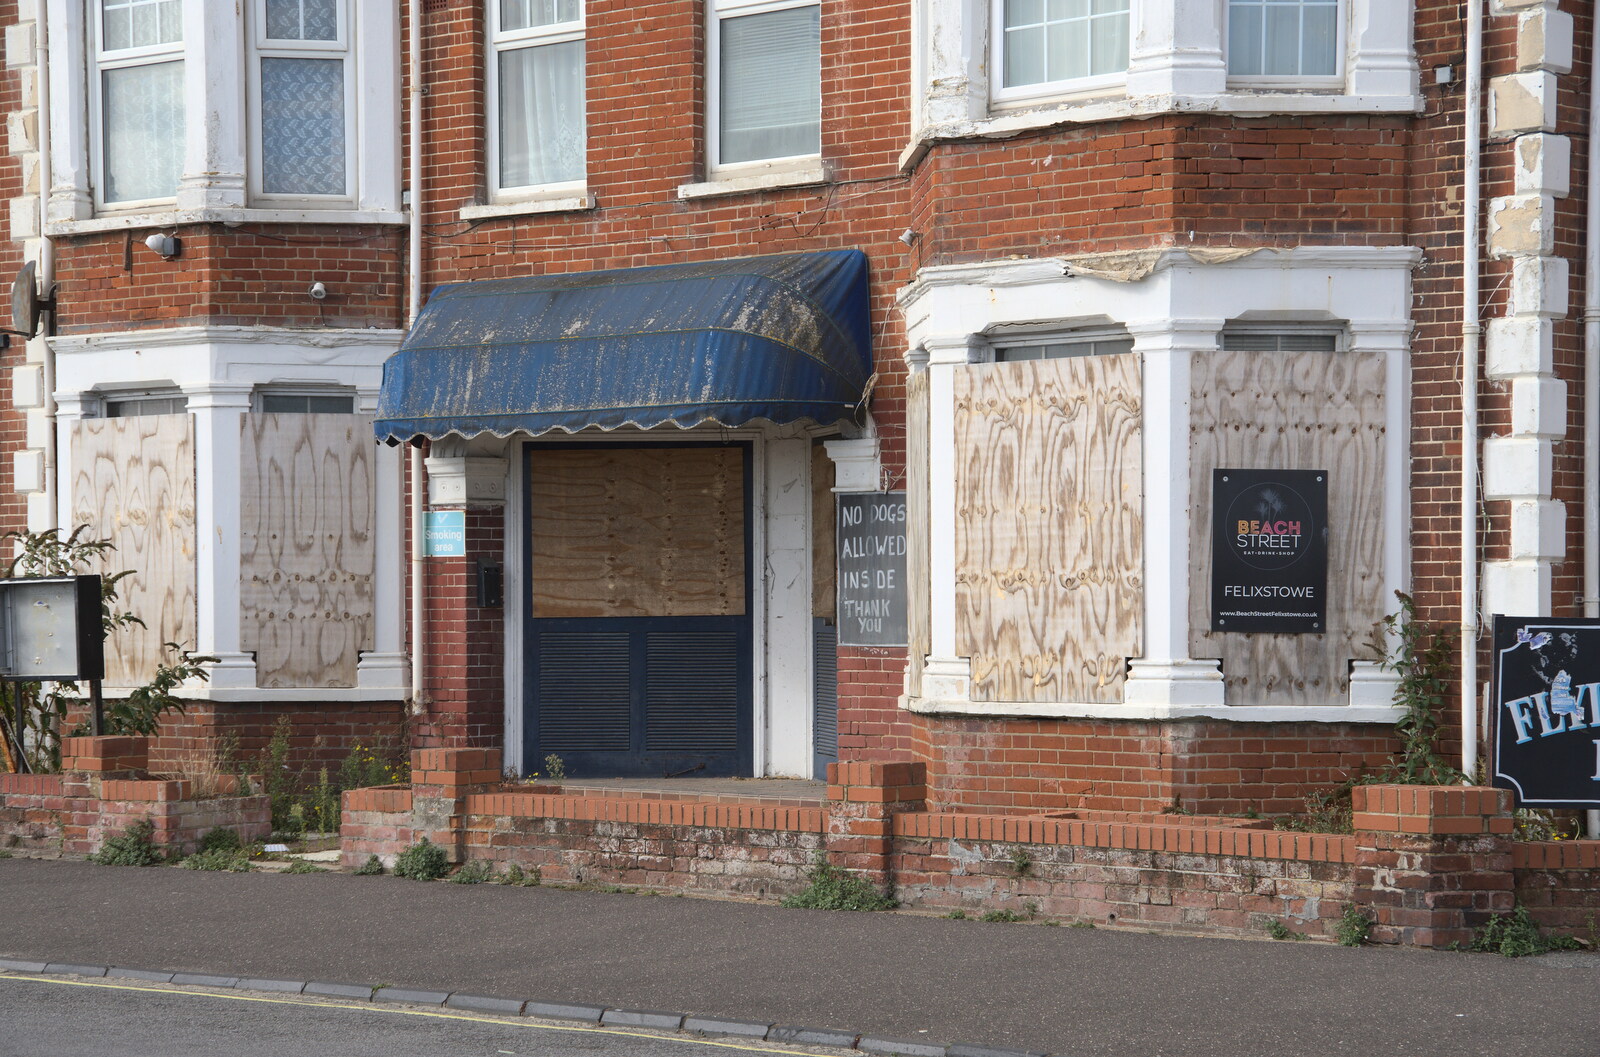 A Postcard from Felixstowe, Suffolk - 5th October 2022: The hotel's derelict front entrance